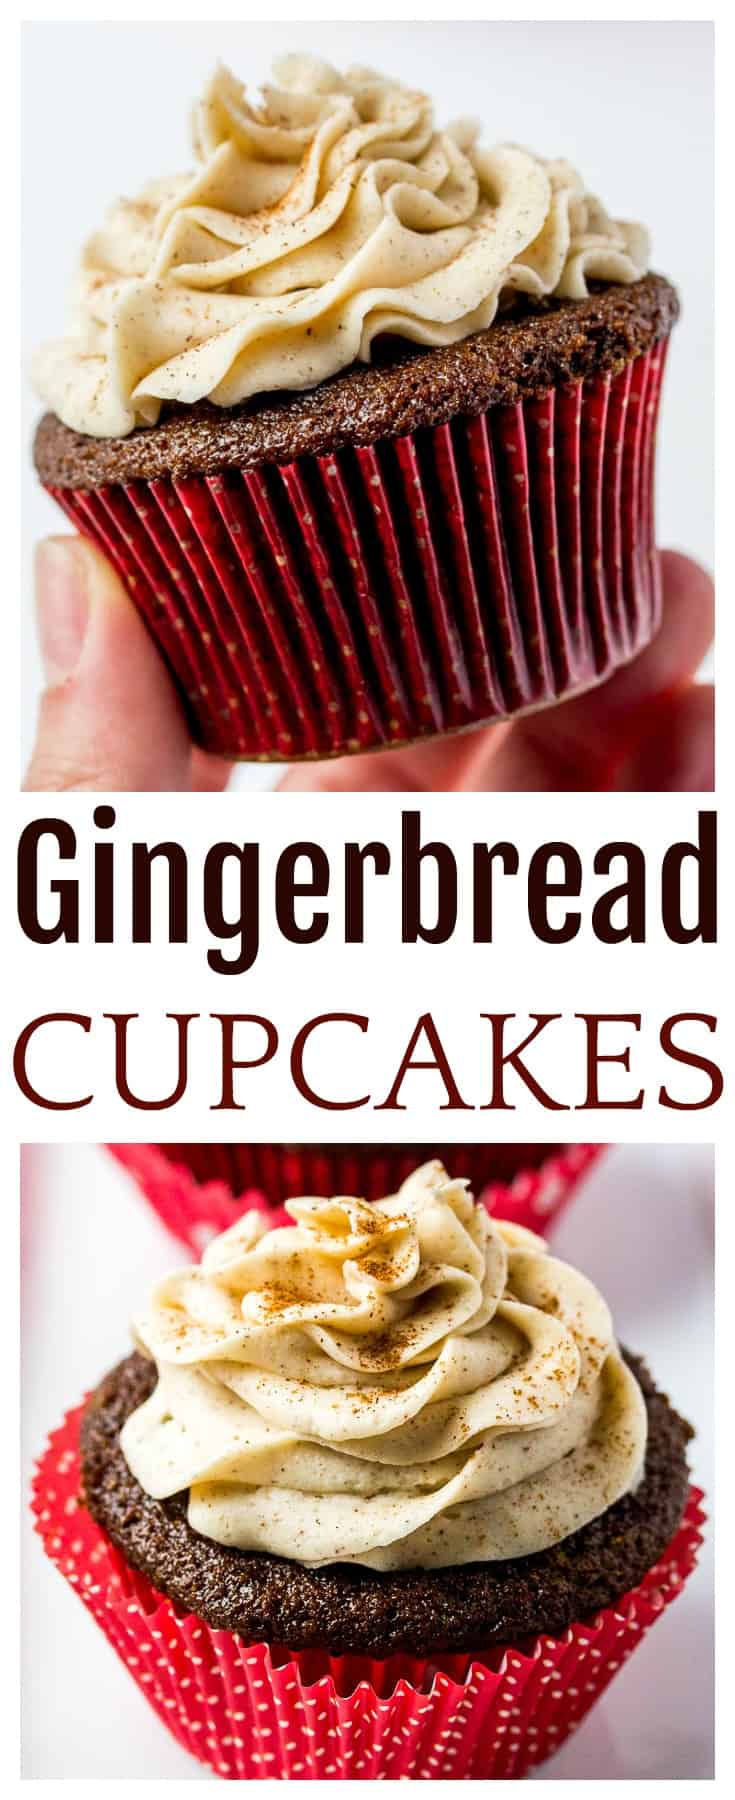 Gingerbread Cupcakes with Cinnamon Vanilla Buttercream Frosting - an easy recipe to bring the best nostalgic, classic taste to the dessert table this Christmas holiday season! Made with molasses and spices, these cupcakes are sure to delight! | #gingerbread #cupcakes